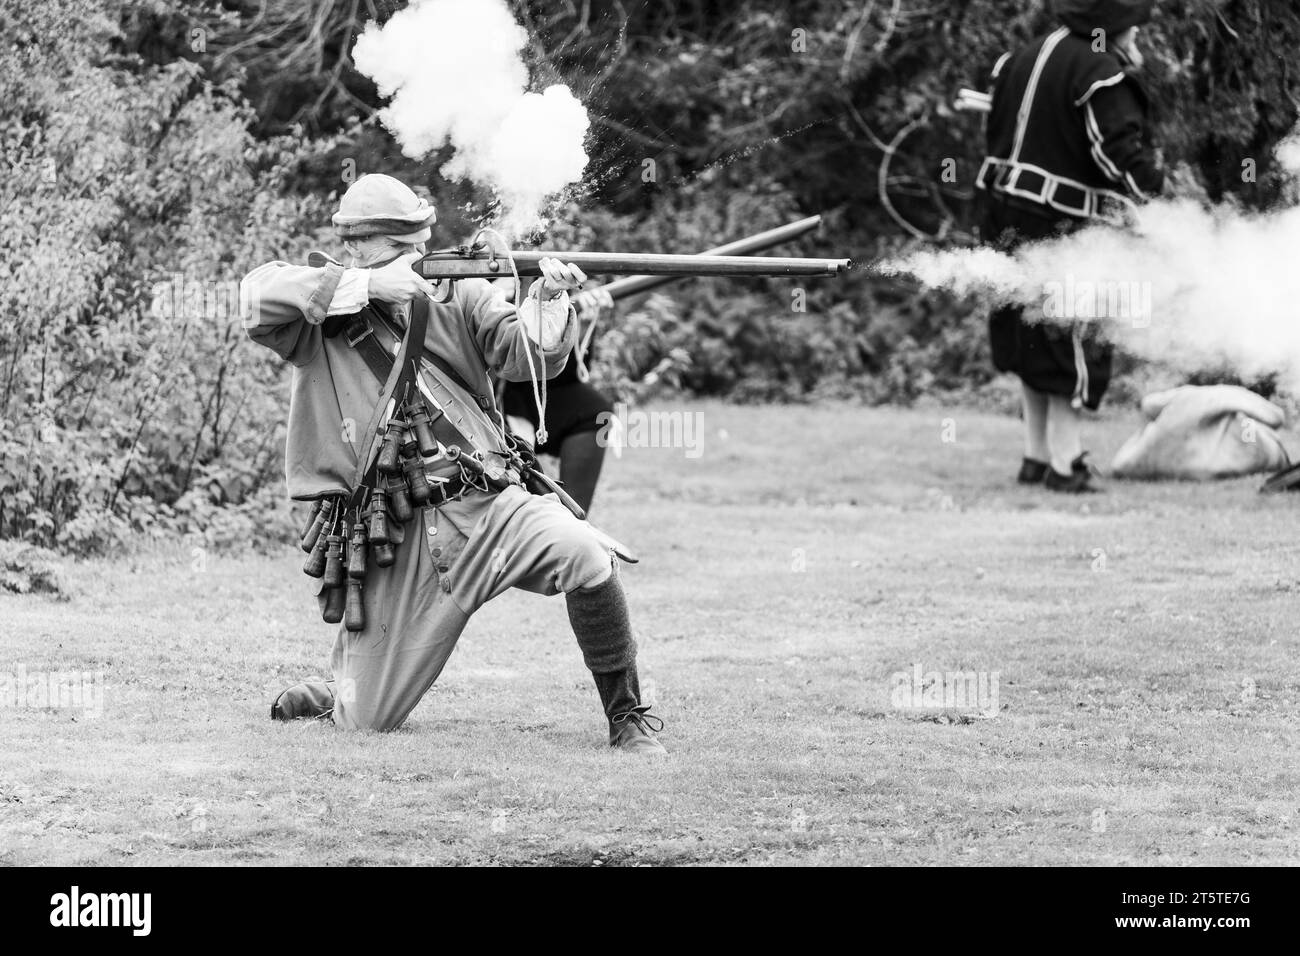 A musketeer firing a flintlock musket - the Siege of Basing House, from the English civil war, English Civil War Society 16.09.23, Basingstoke Stock Photo